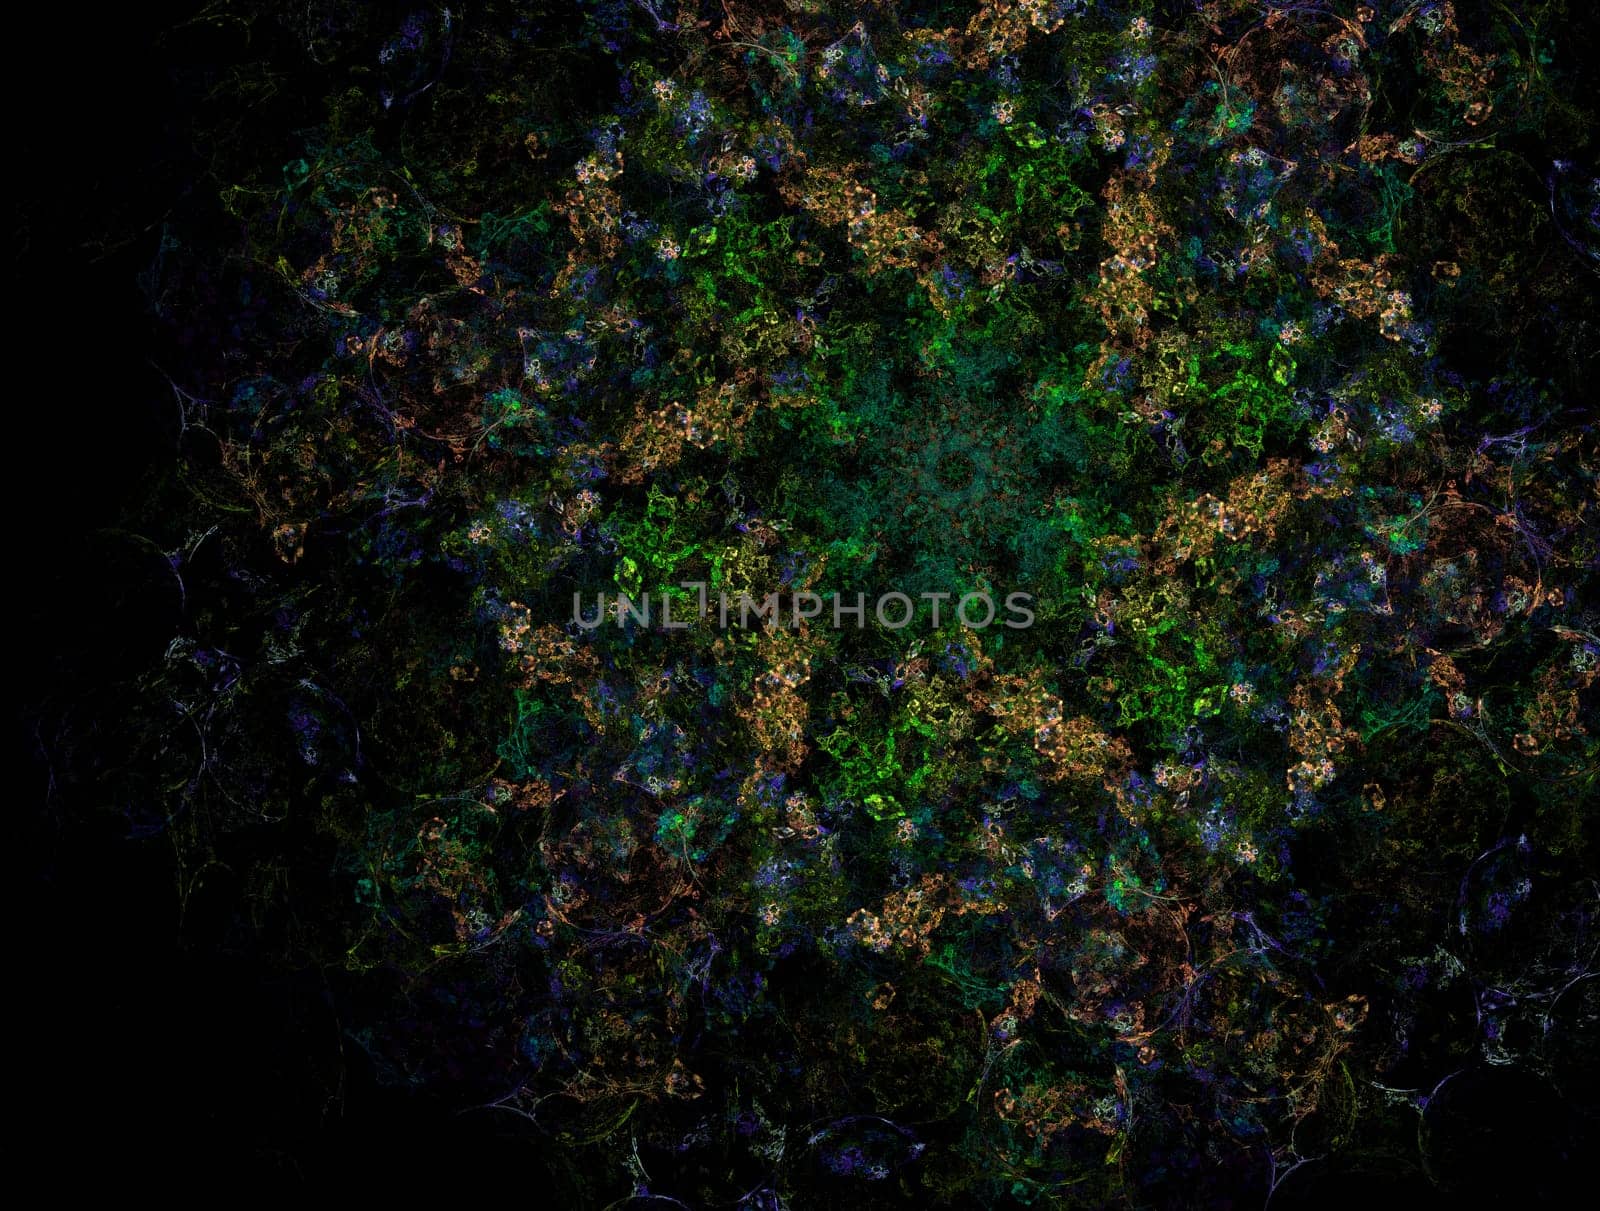 Imaginatory lush fractal texture image abstract background